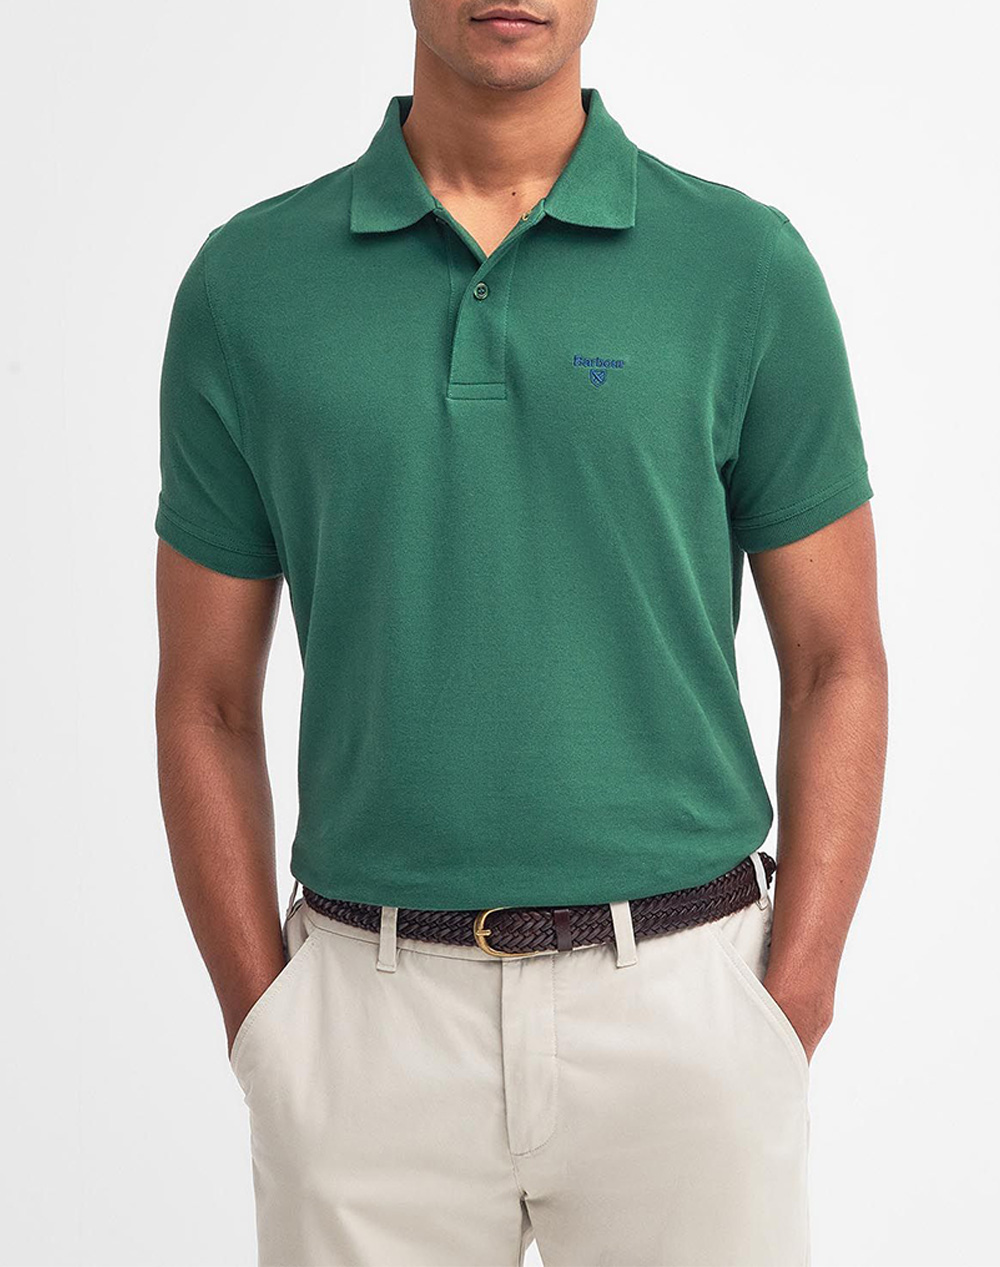 BARBOUR BARBOUR LIGHTWEIGHT SPORTS POLO ΜΠΛΟΥΖΑ POLO MML1367-BROL72.3 Green